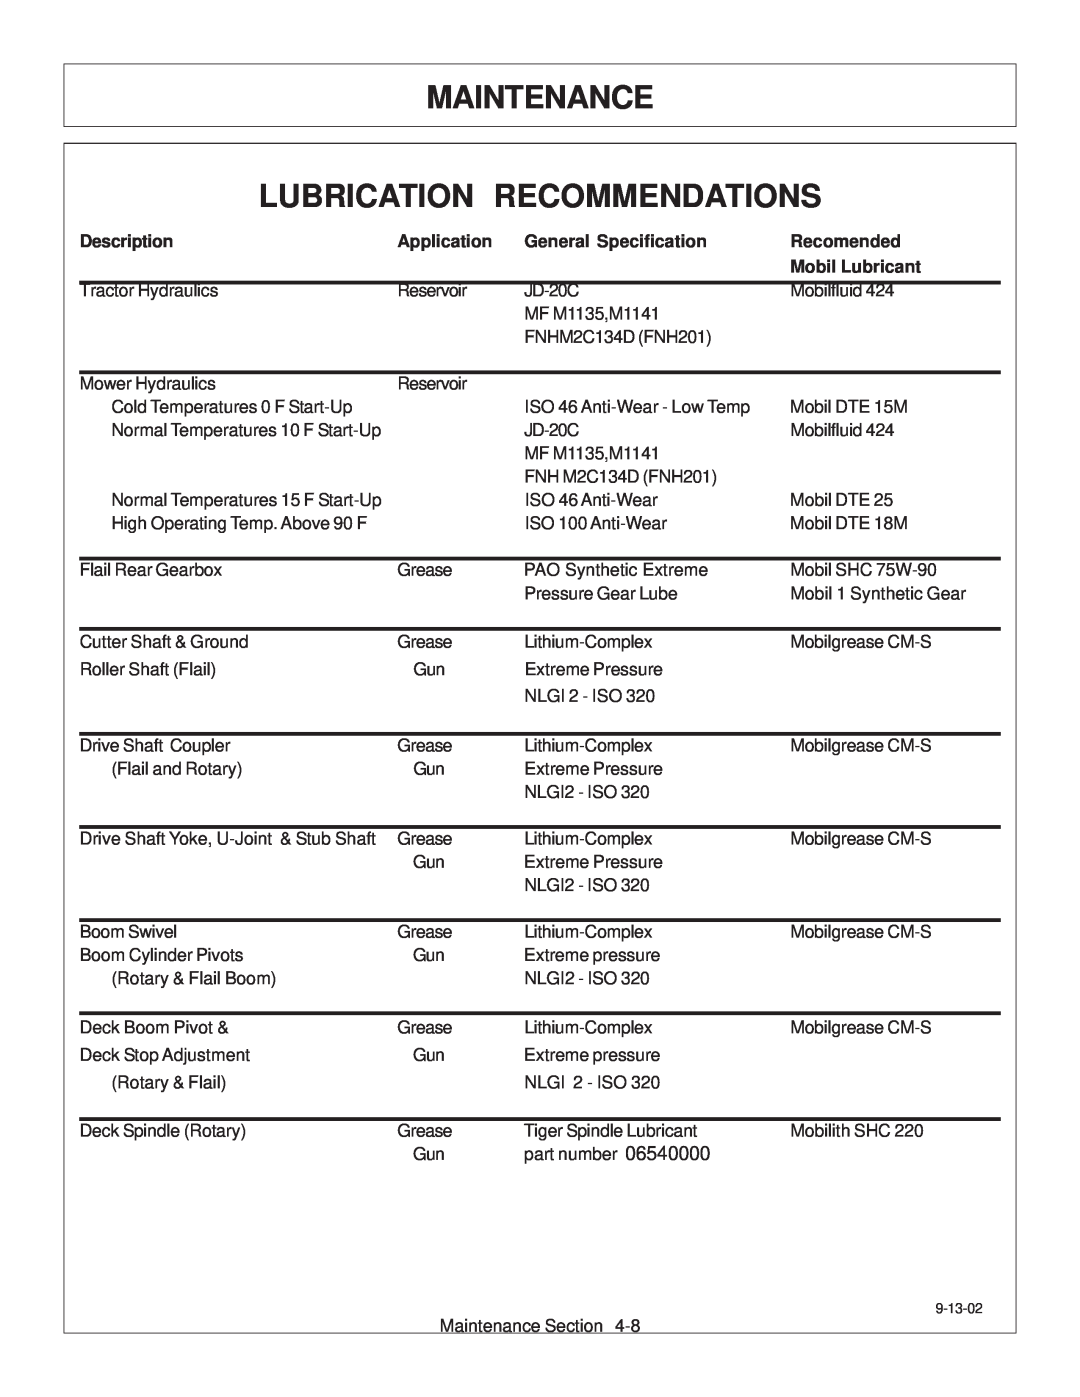 Tiger Products Co., Ltd JD 72-7520 manual Lubrication Recommendations, Maintenance, Description, Application, Recomended 